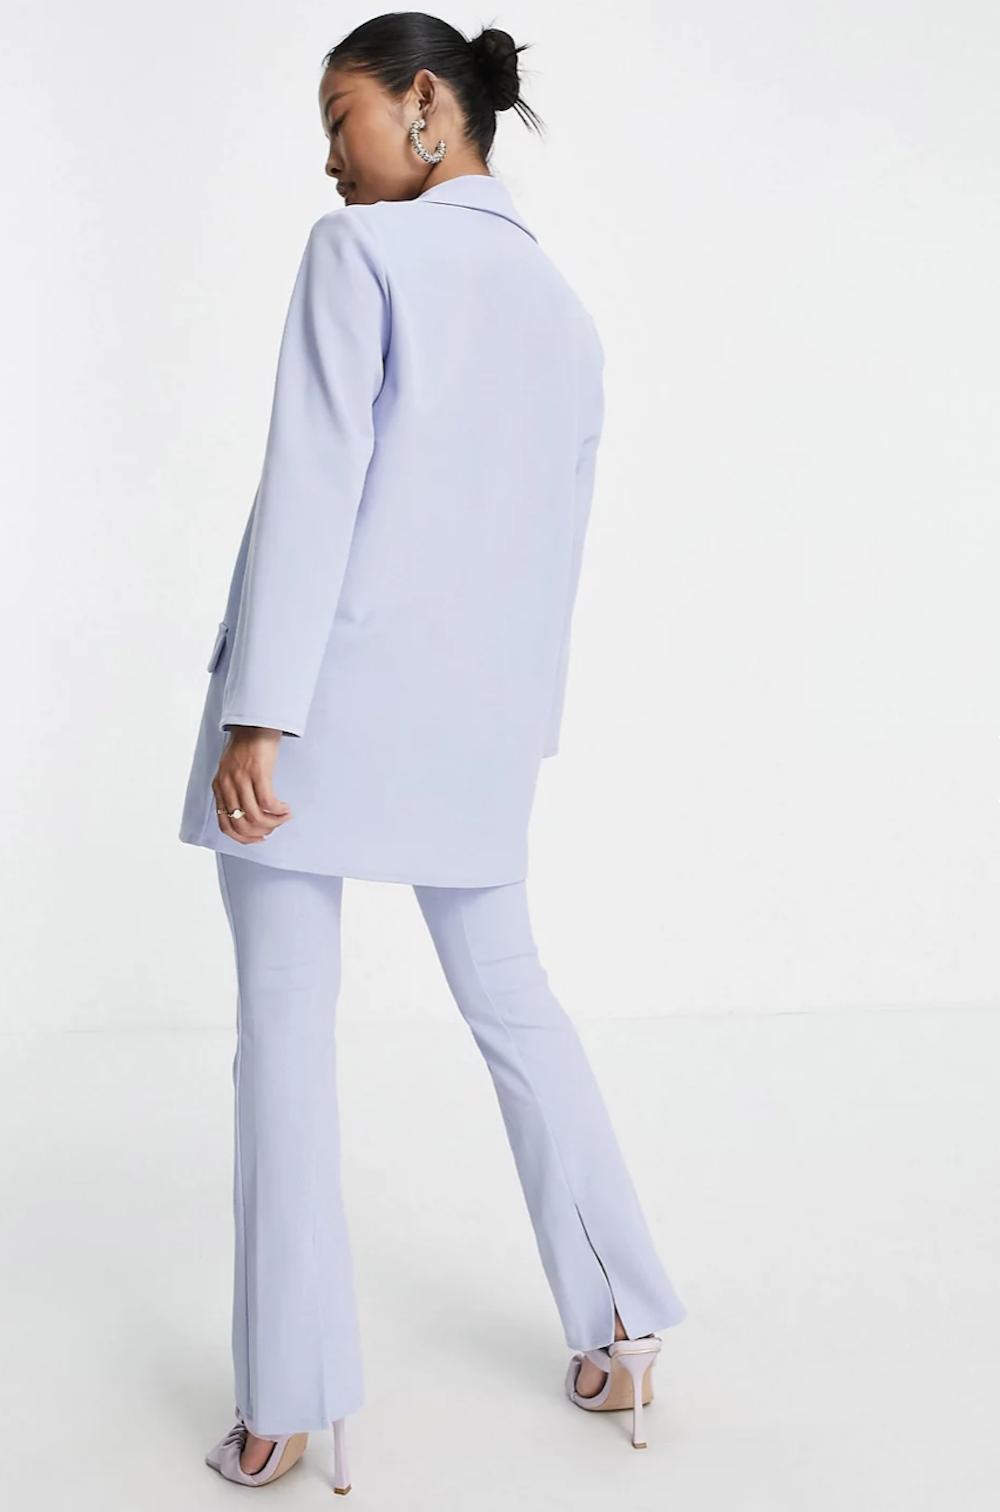 Asian woman with black hair slicked into a bun photographed from behind wearing chunky pearl hoop earrings and a lavender blue trouser suit with strappy heels